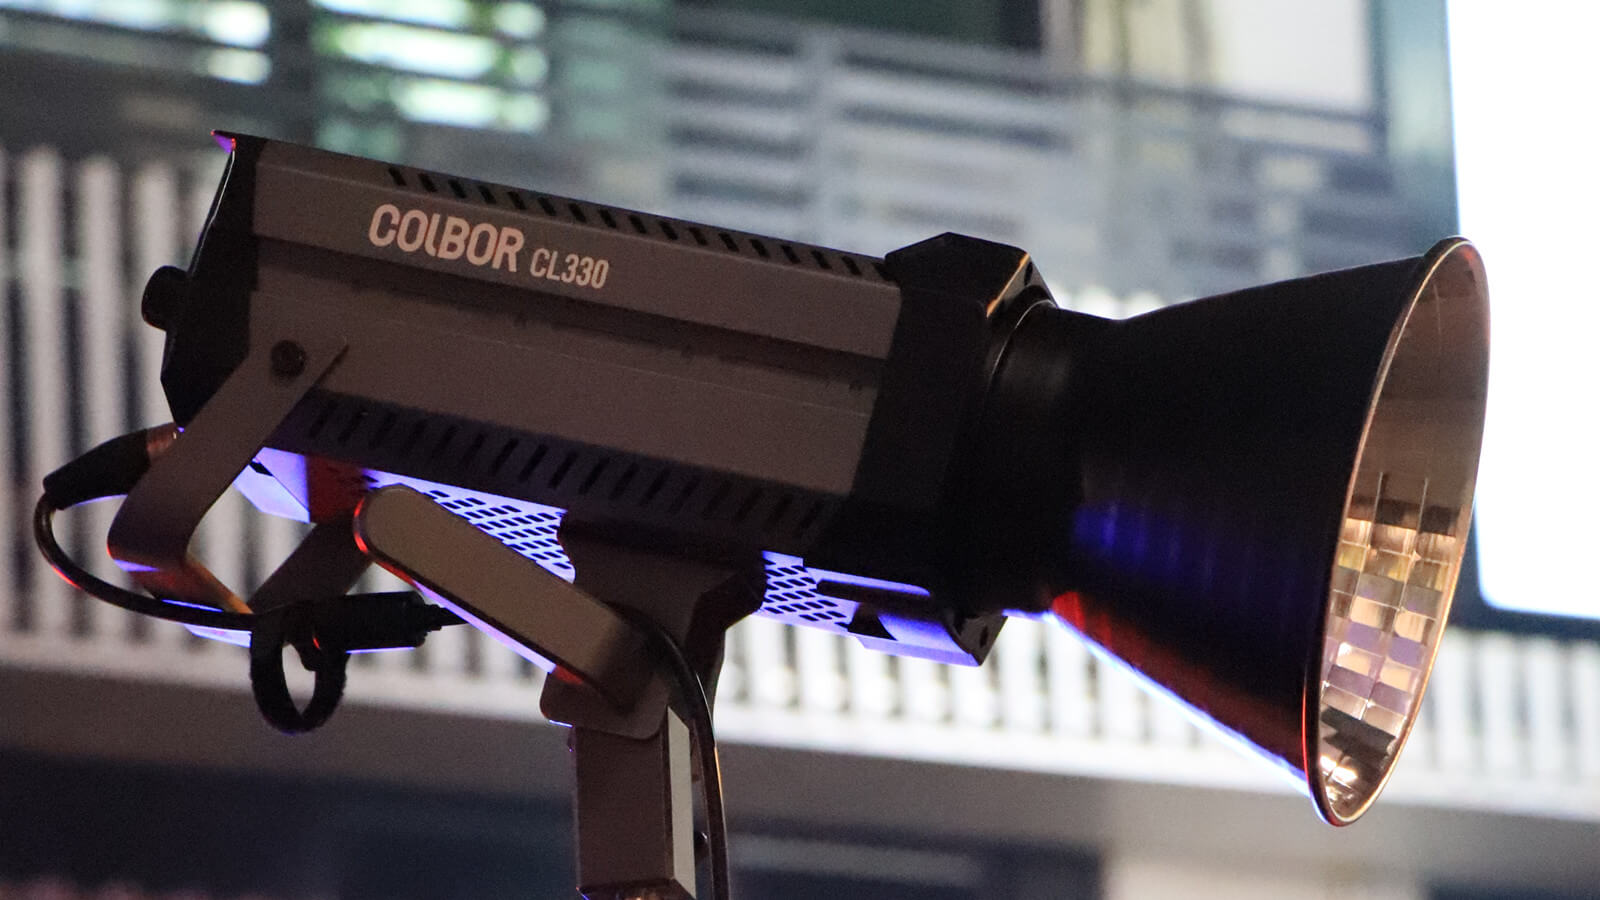 COLBOR CL330 offers lighting for real estate photography.